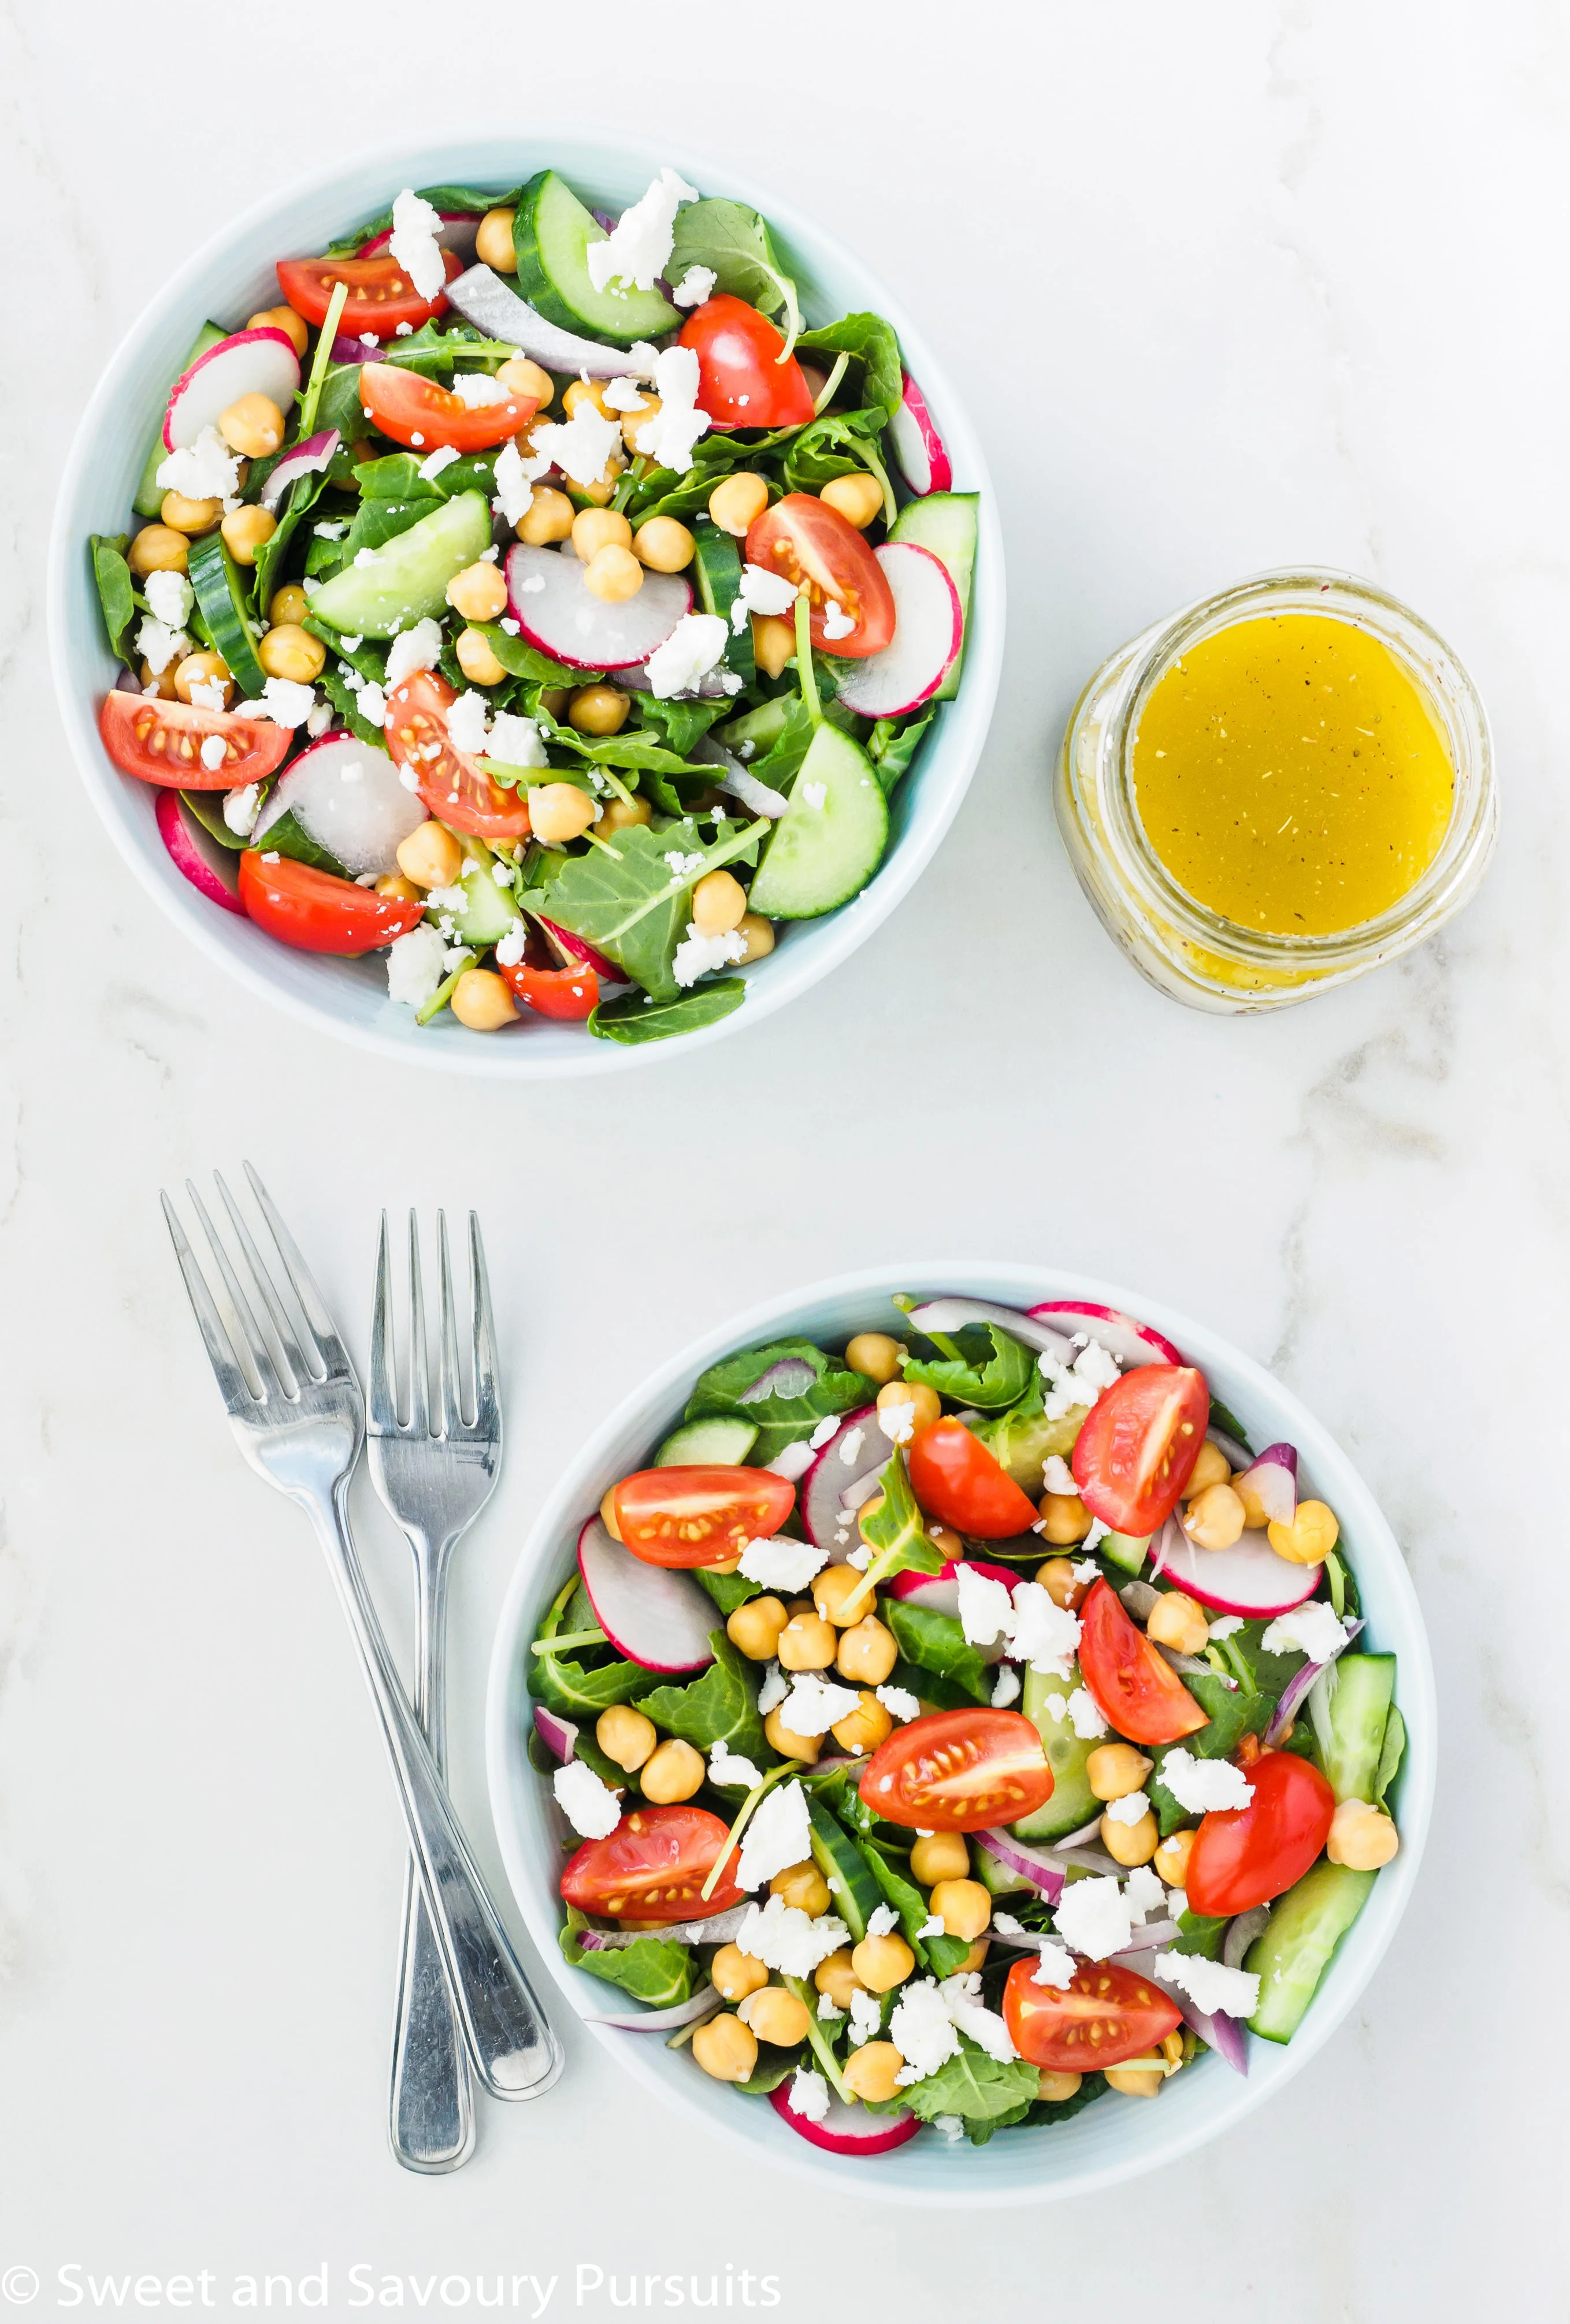 Mediterranean baby kale salad with chickpeas served with a lemon garlic dressing on the side.